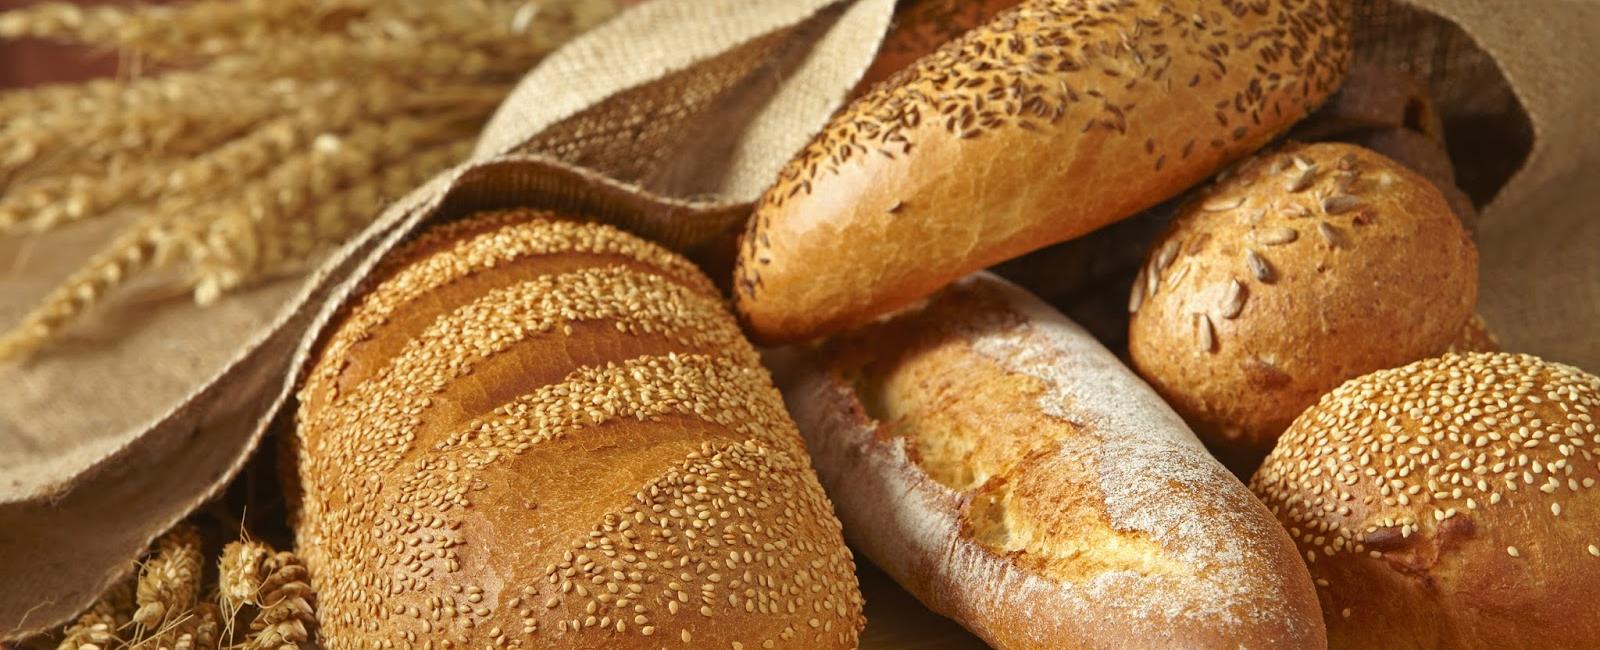 The common bread ingredient l cysteine is derived from human hair